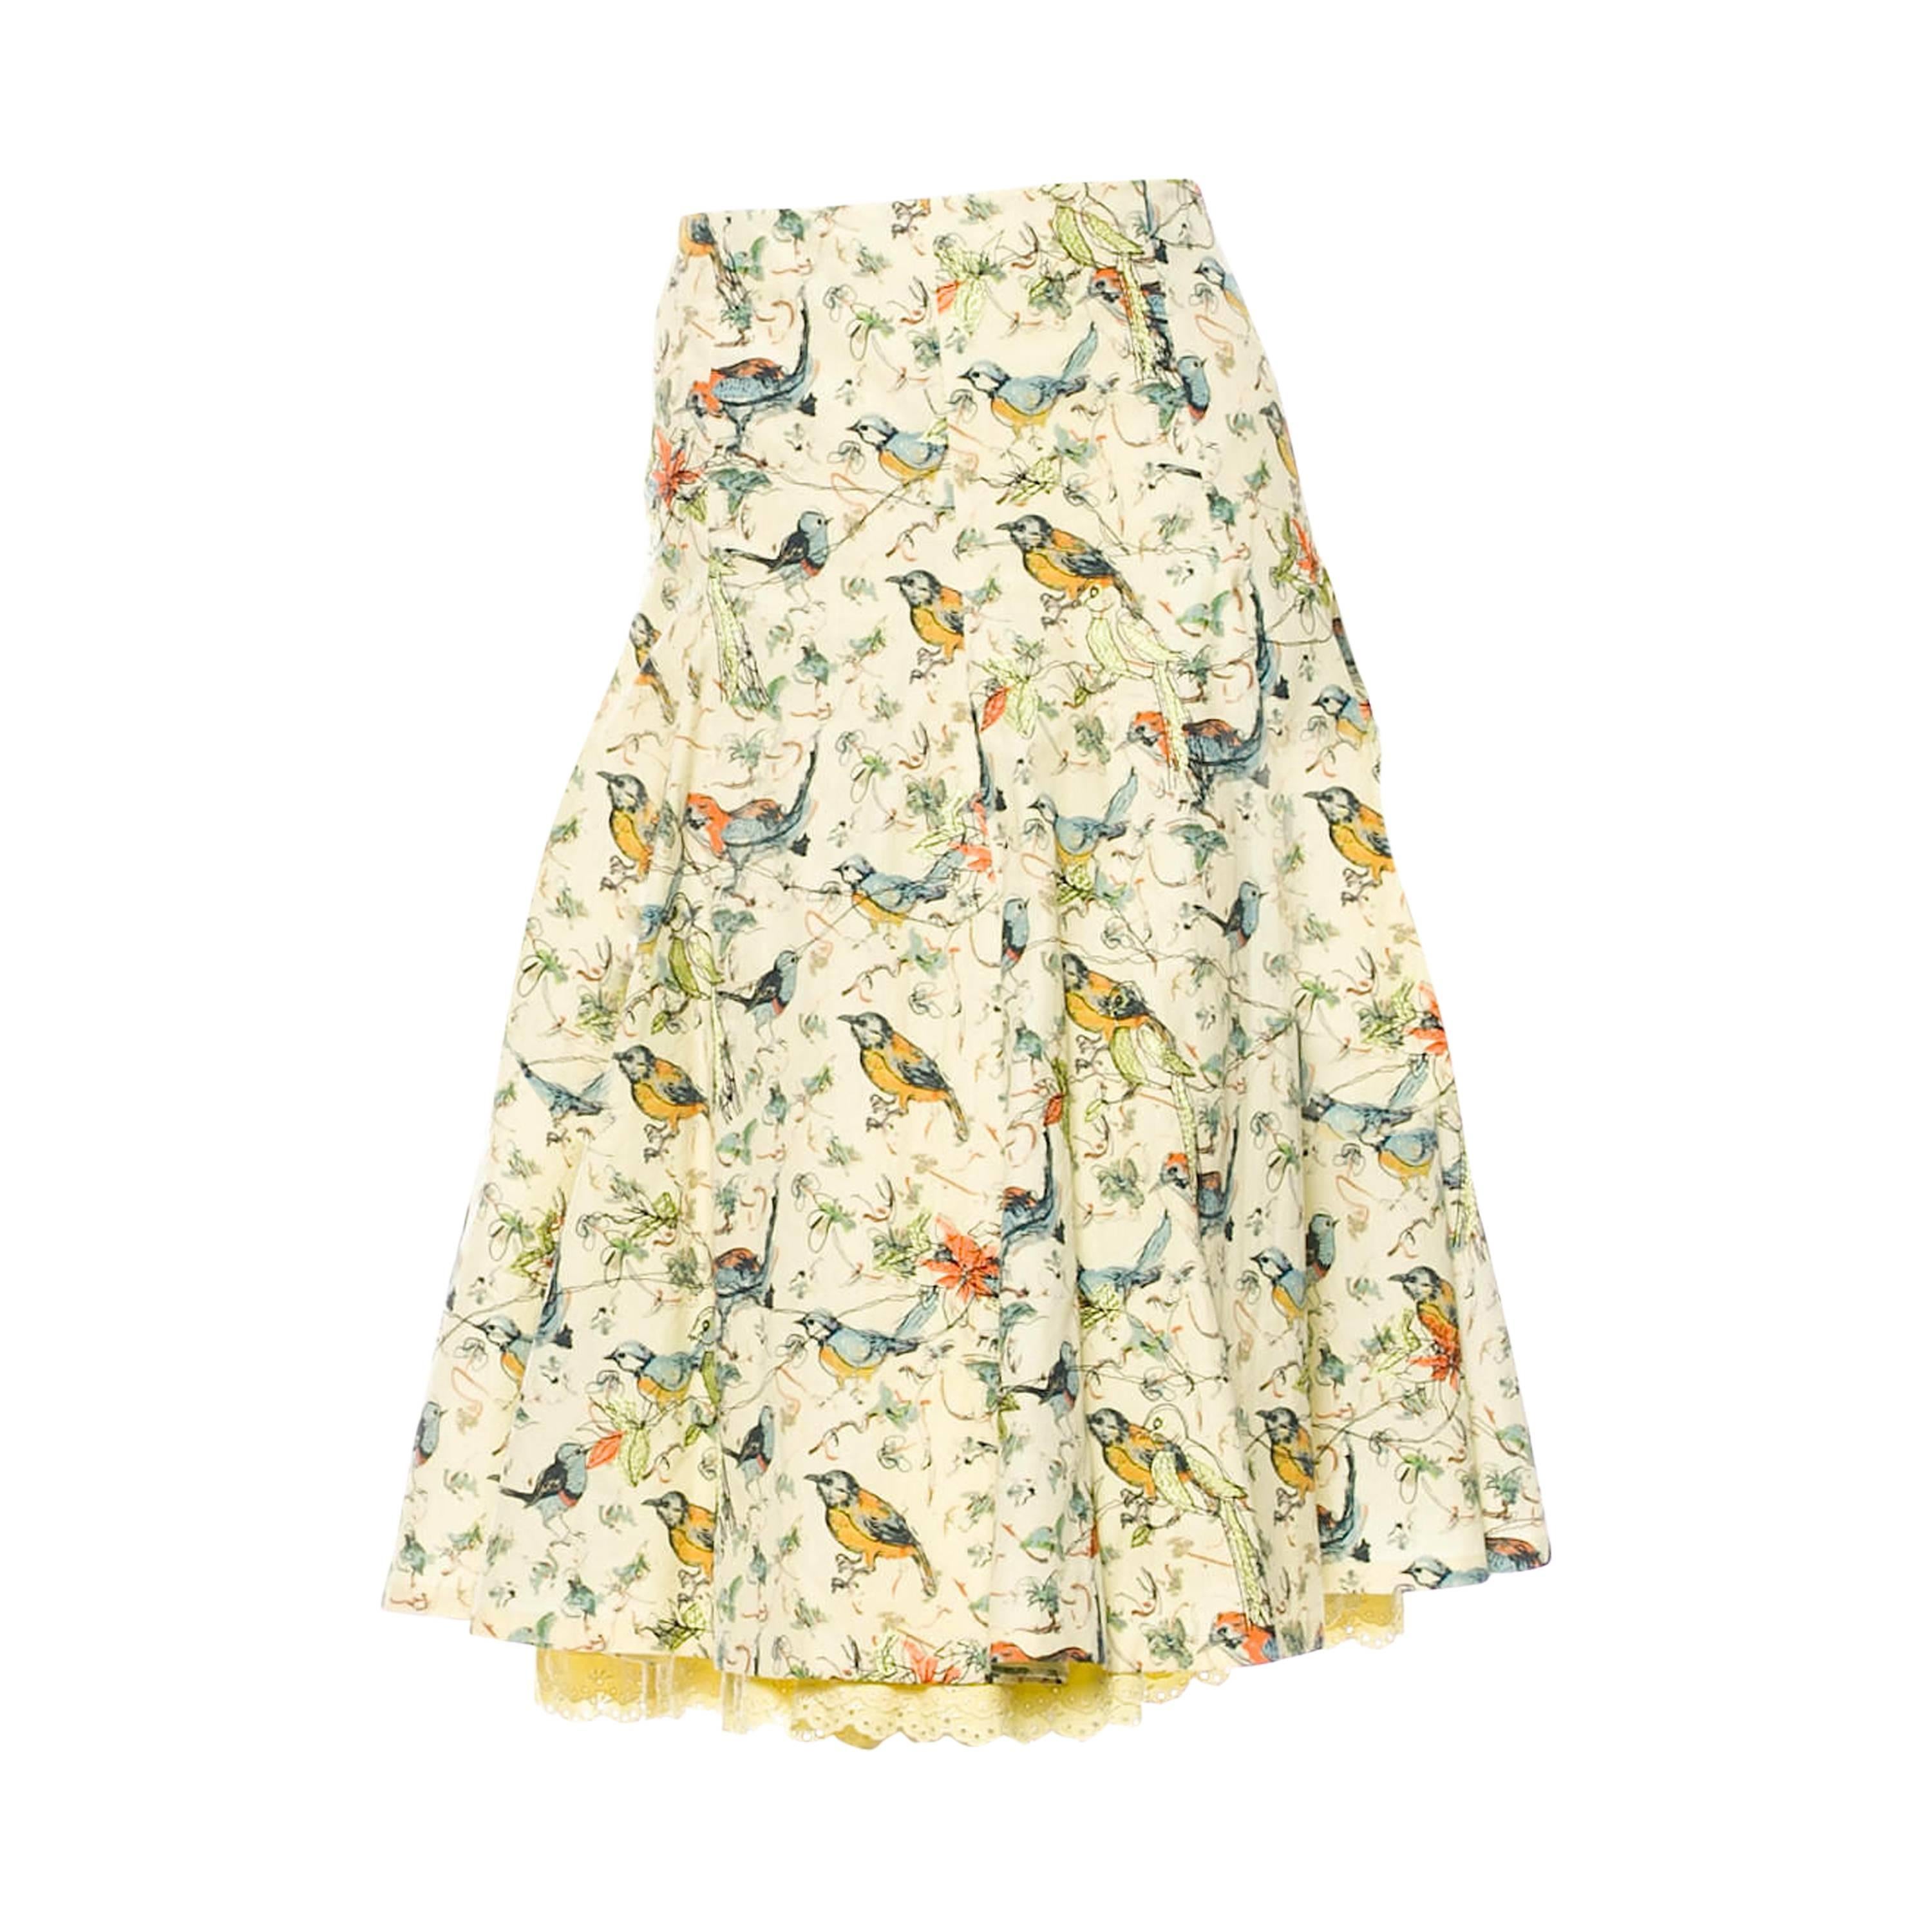 Rare Alexander McQueen Folk Skirt from SS 2005 "It's Only a Game" For Sale